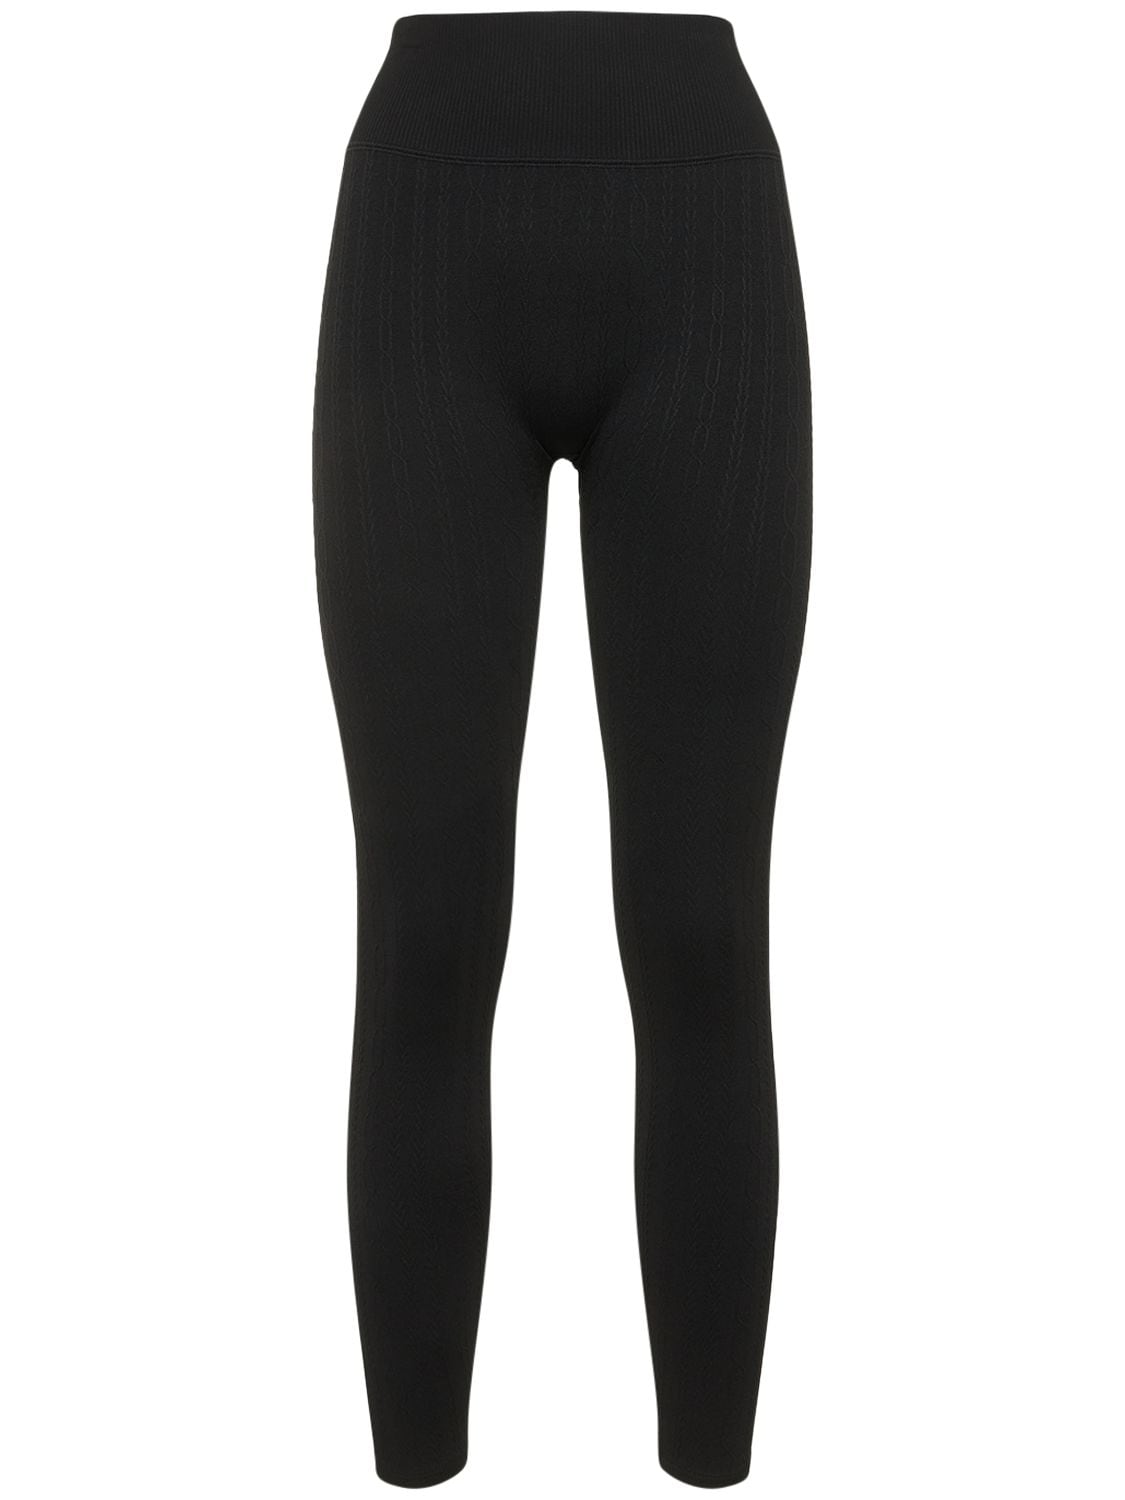 Seamless Cable Knit High Waist Leggings